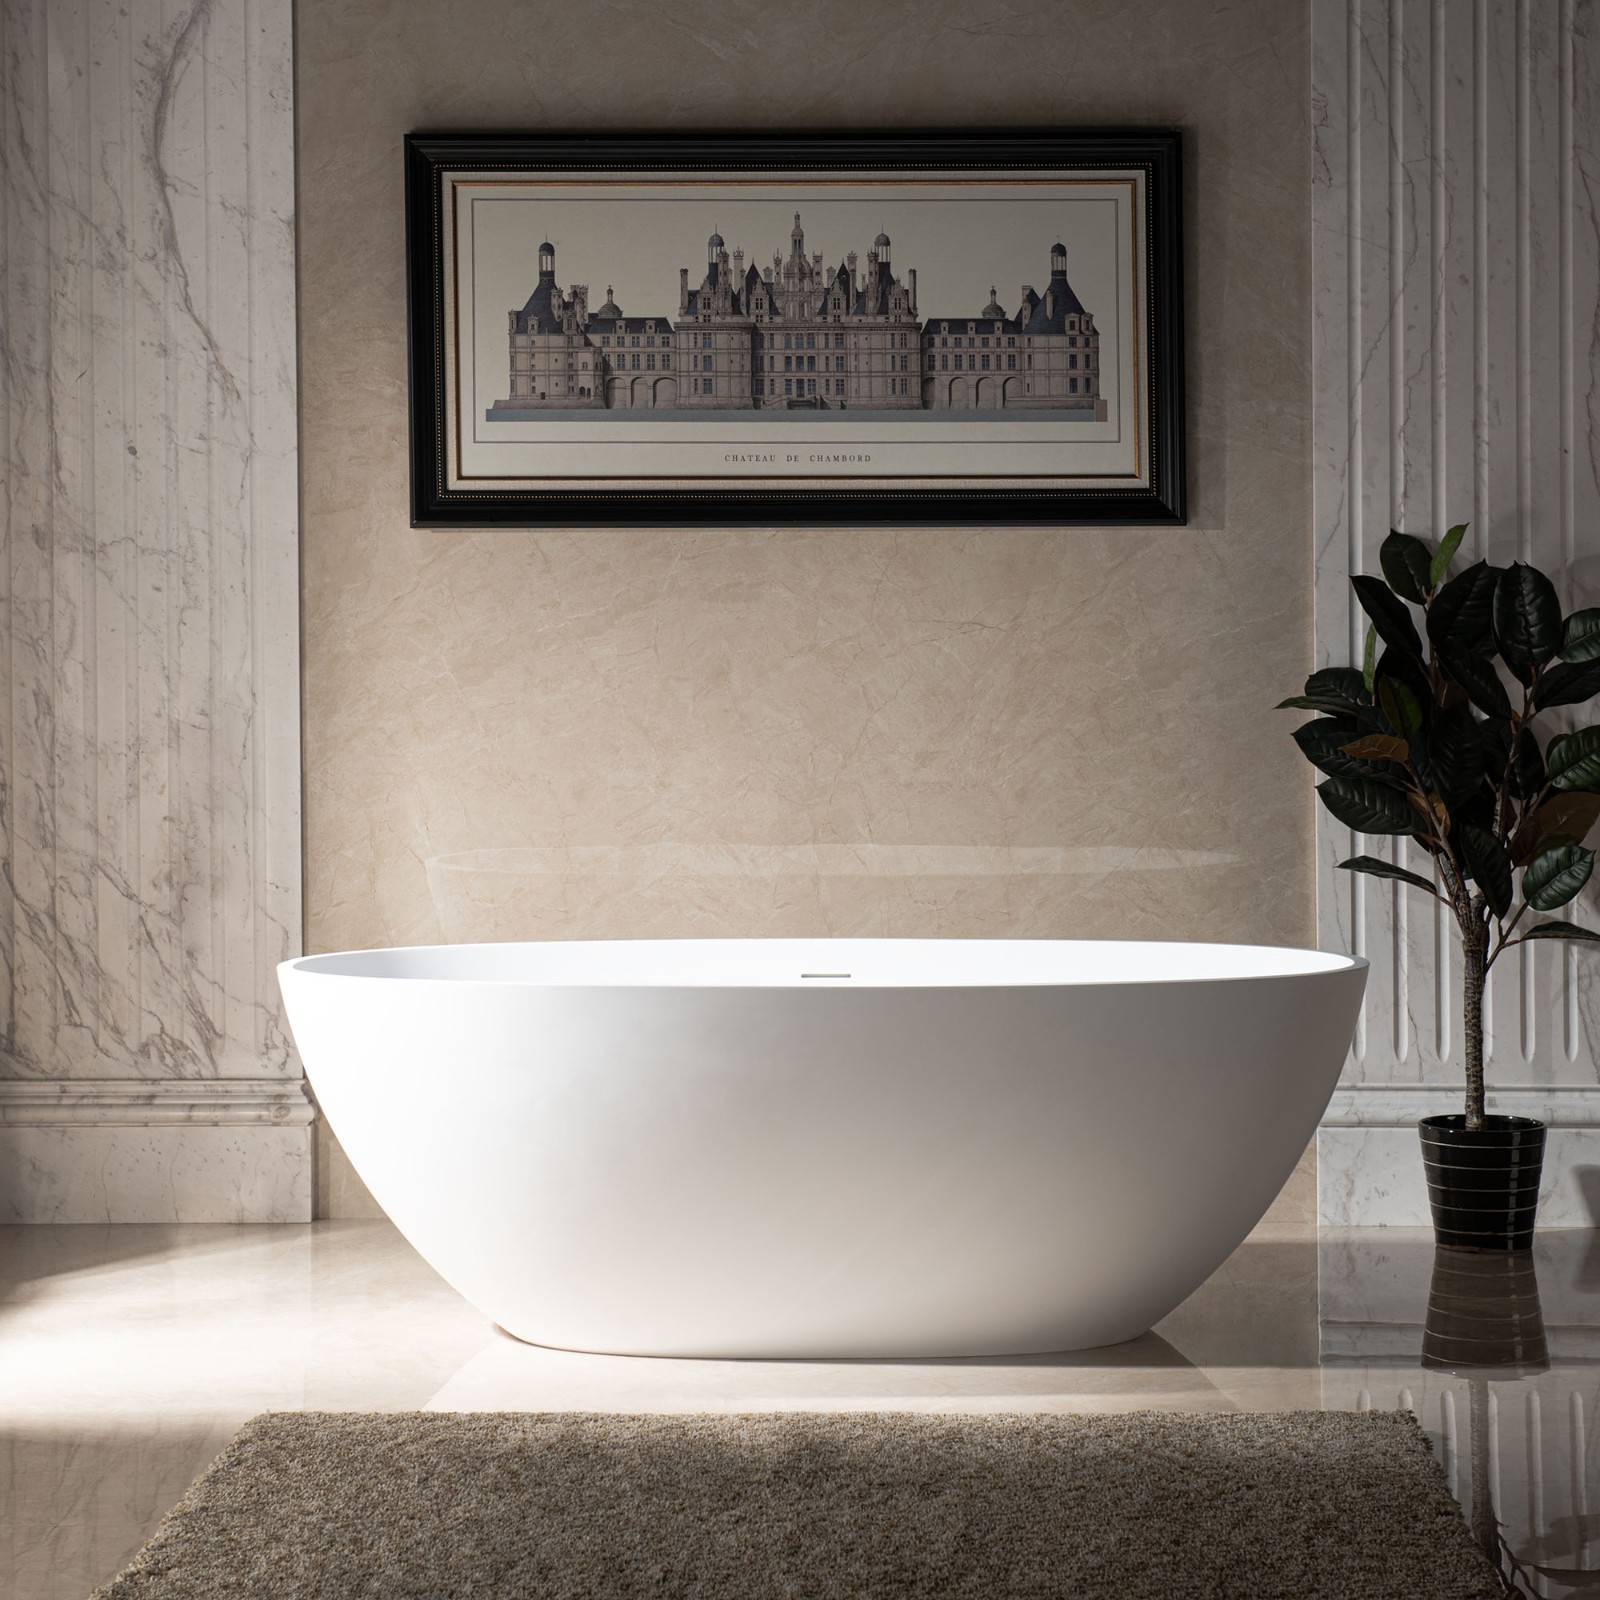  WOODBRIDGE 67 in. x 30.75 in. Luxury Contemporary Solid Surface Freestanding Bathtub in Matte White_597